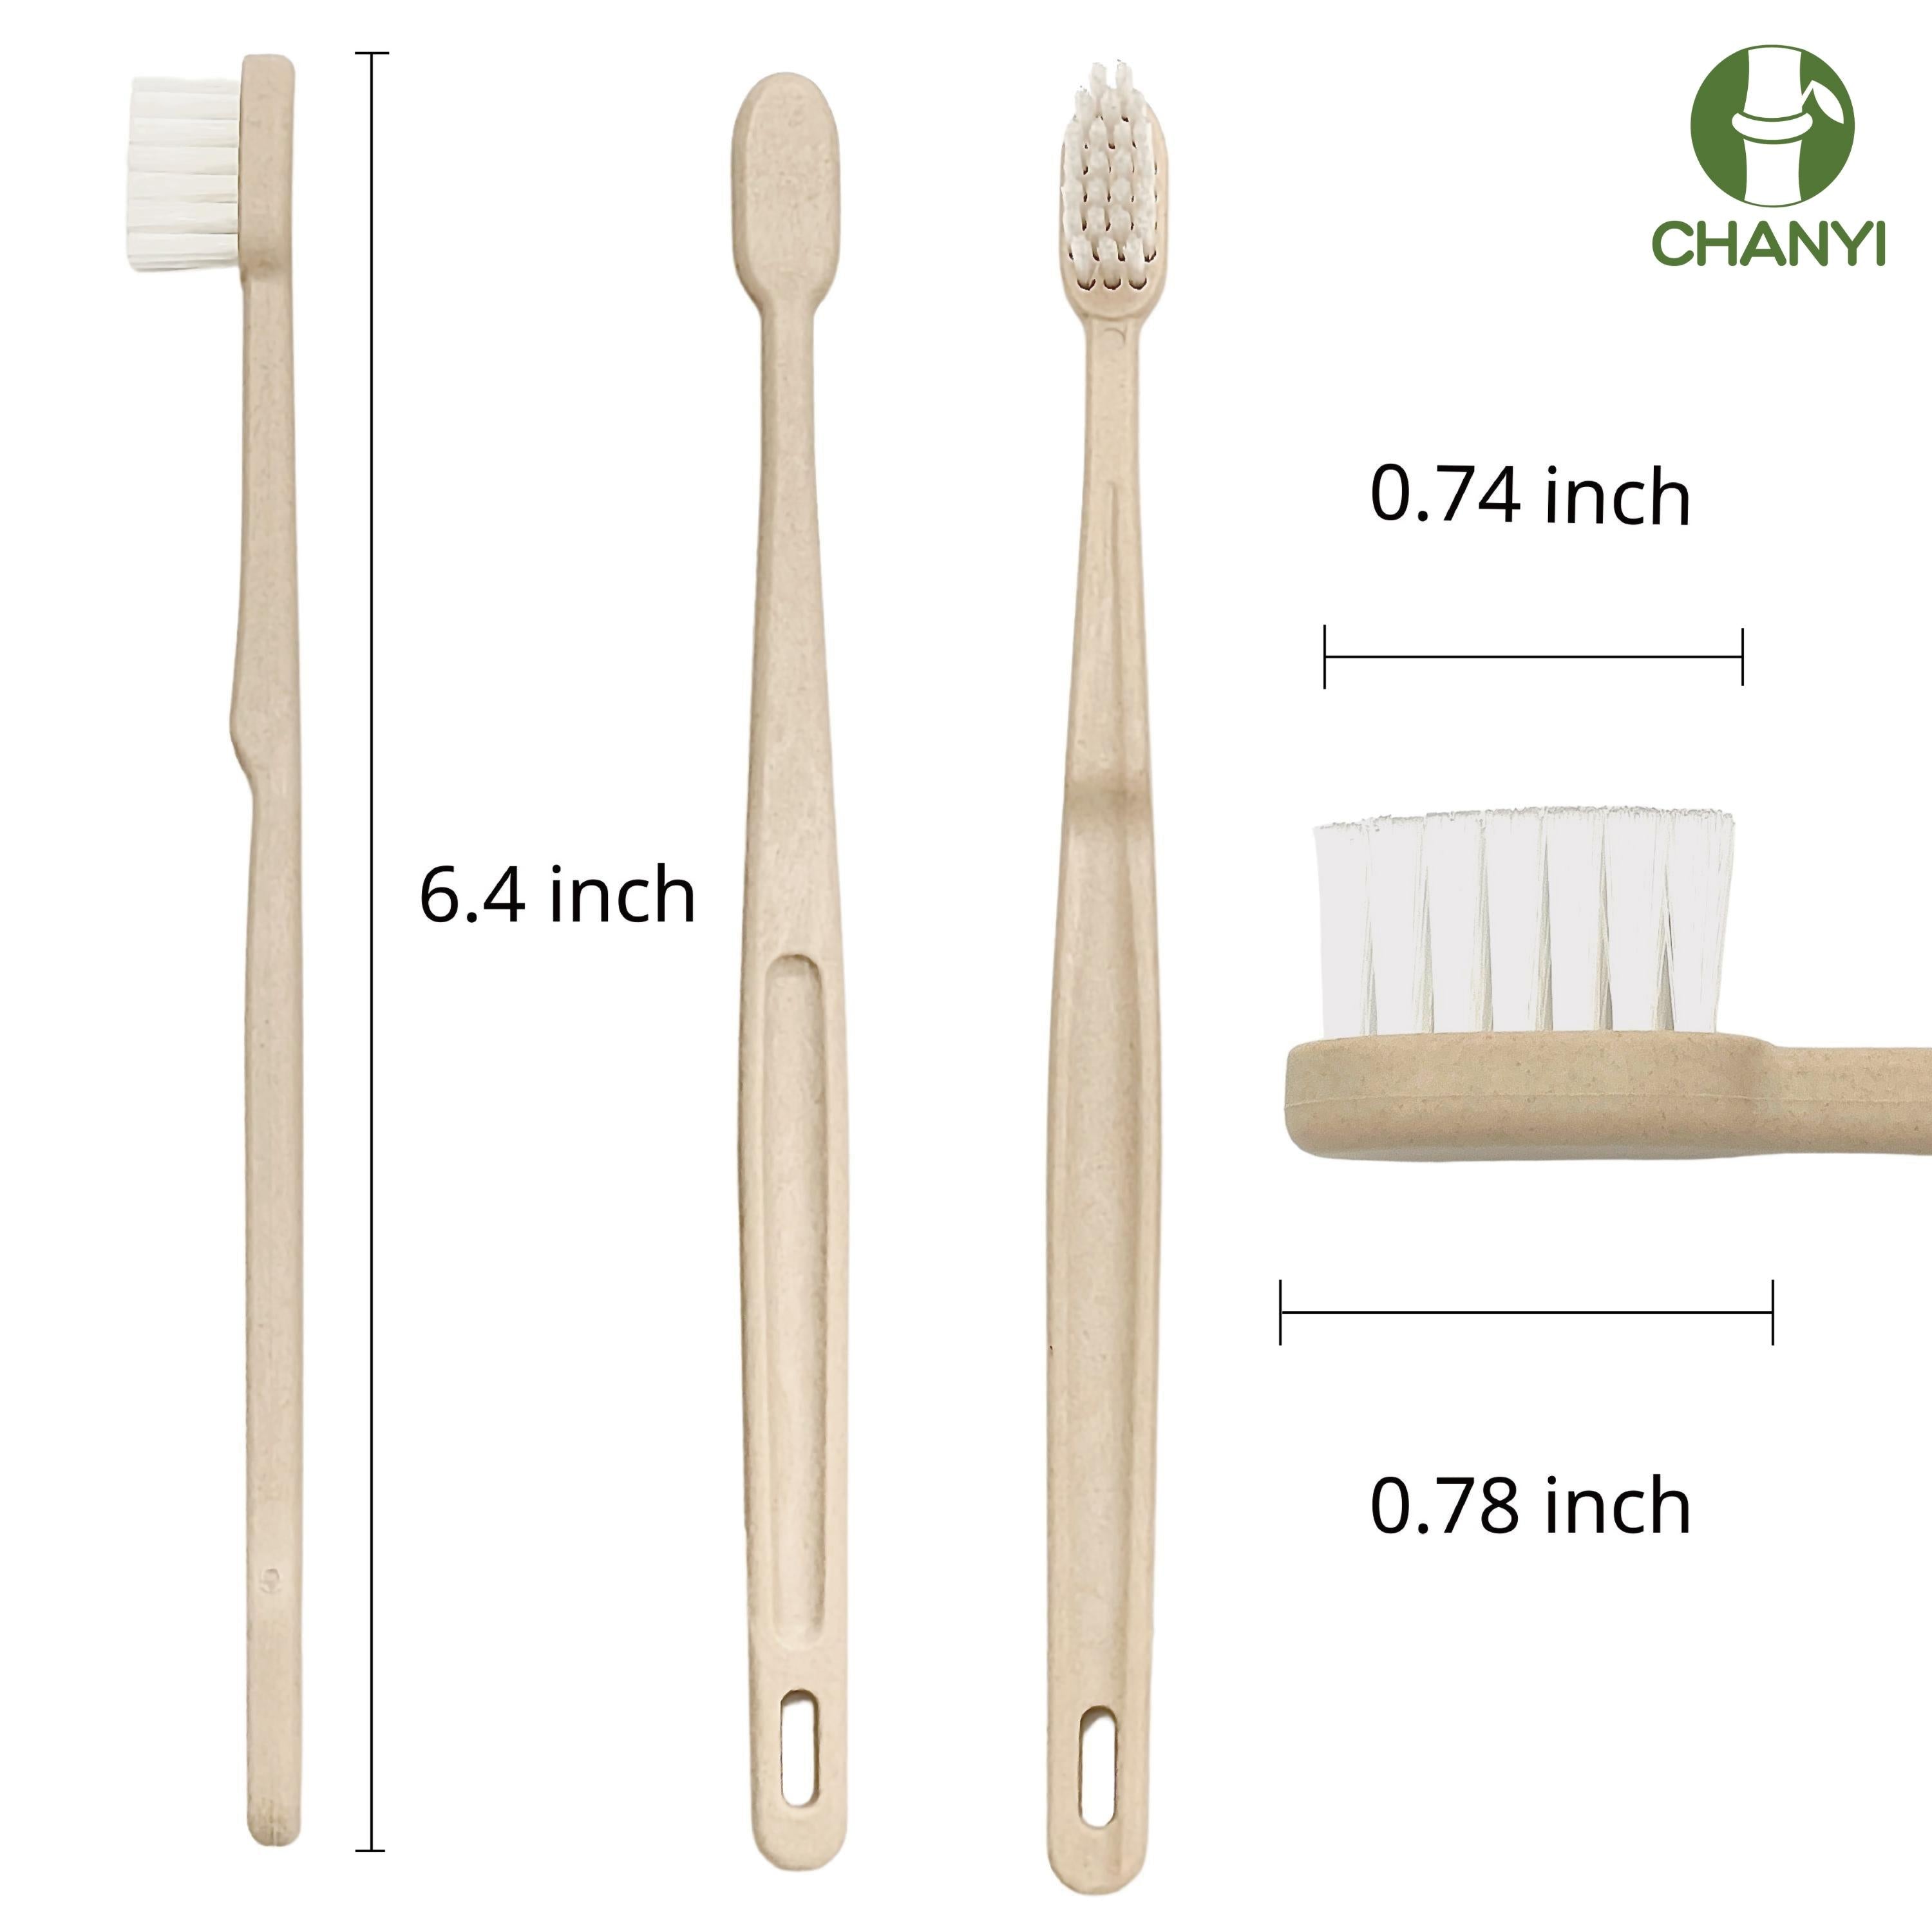 CHANYI Bamboo Toothbrushes - Medium - 100% Plant-Based Bamboo-Fiber Composite, Durable & Splinter Free, Fine BPA Free Bristles, 10 Individually Packaged Brushes - Adult